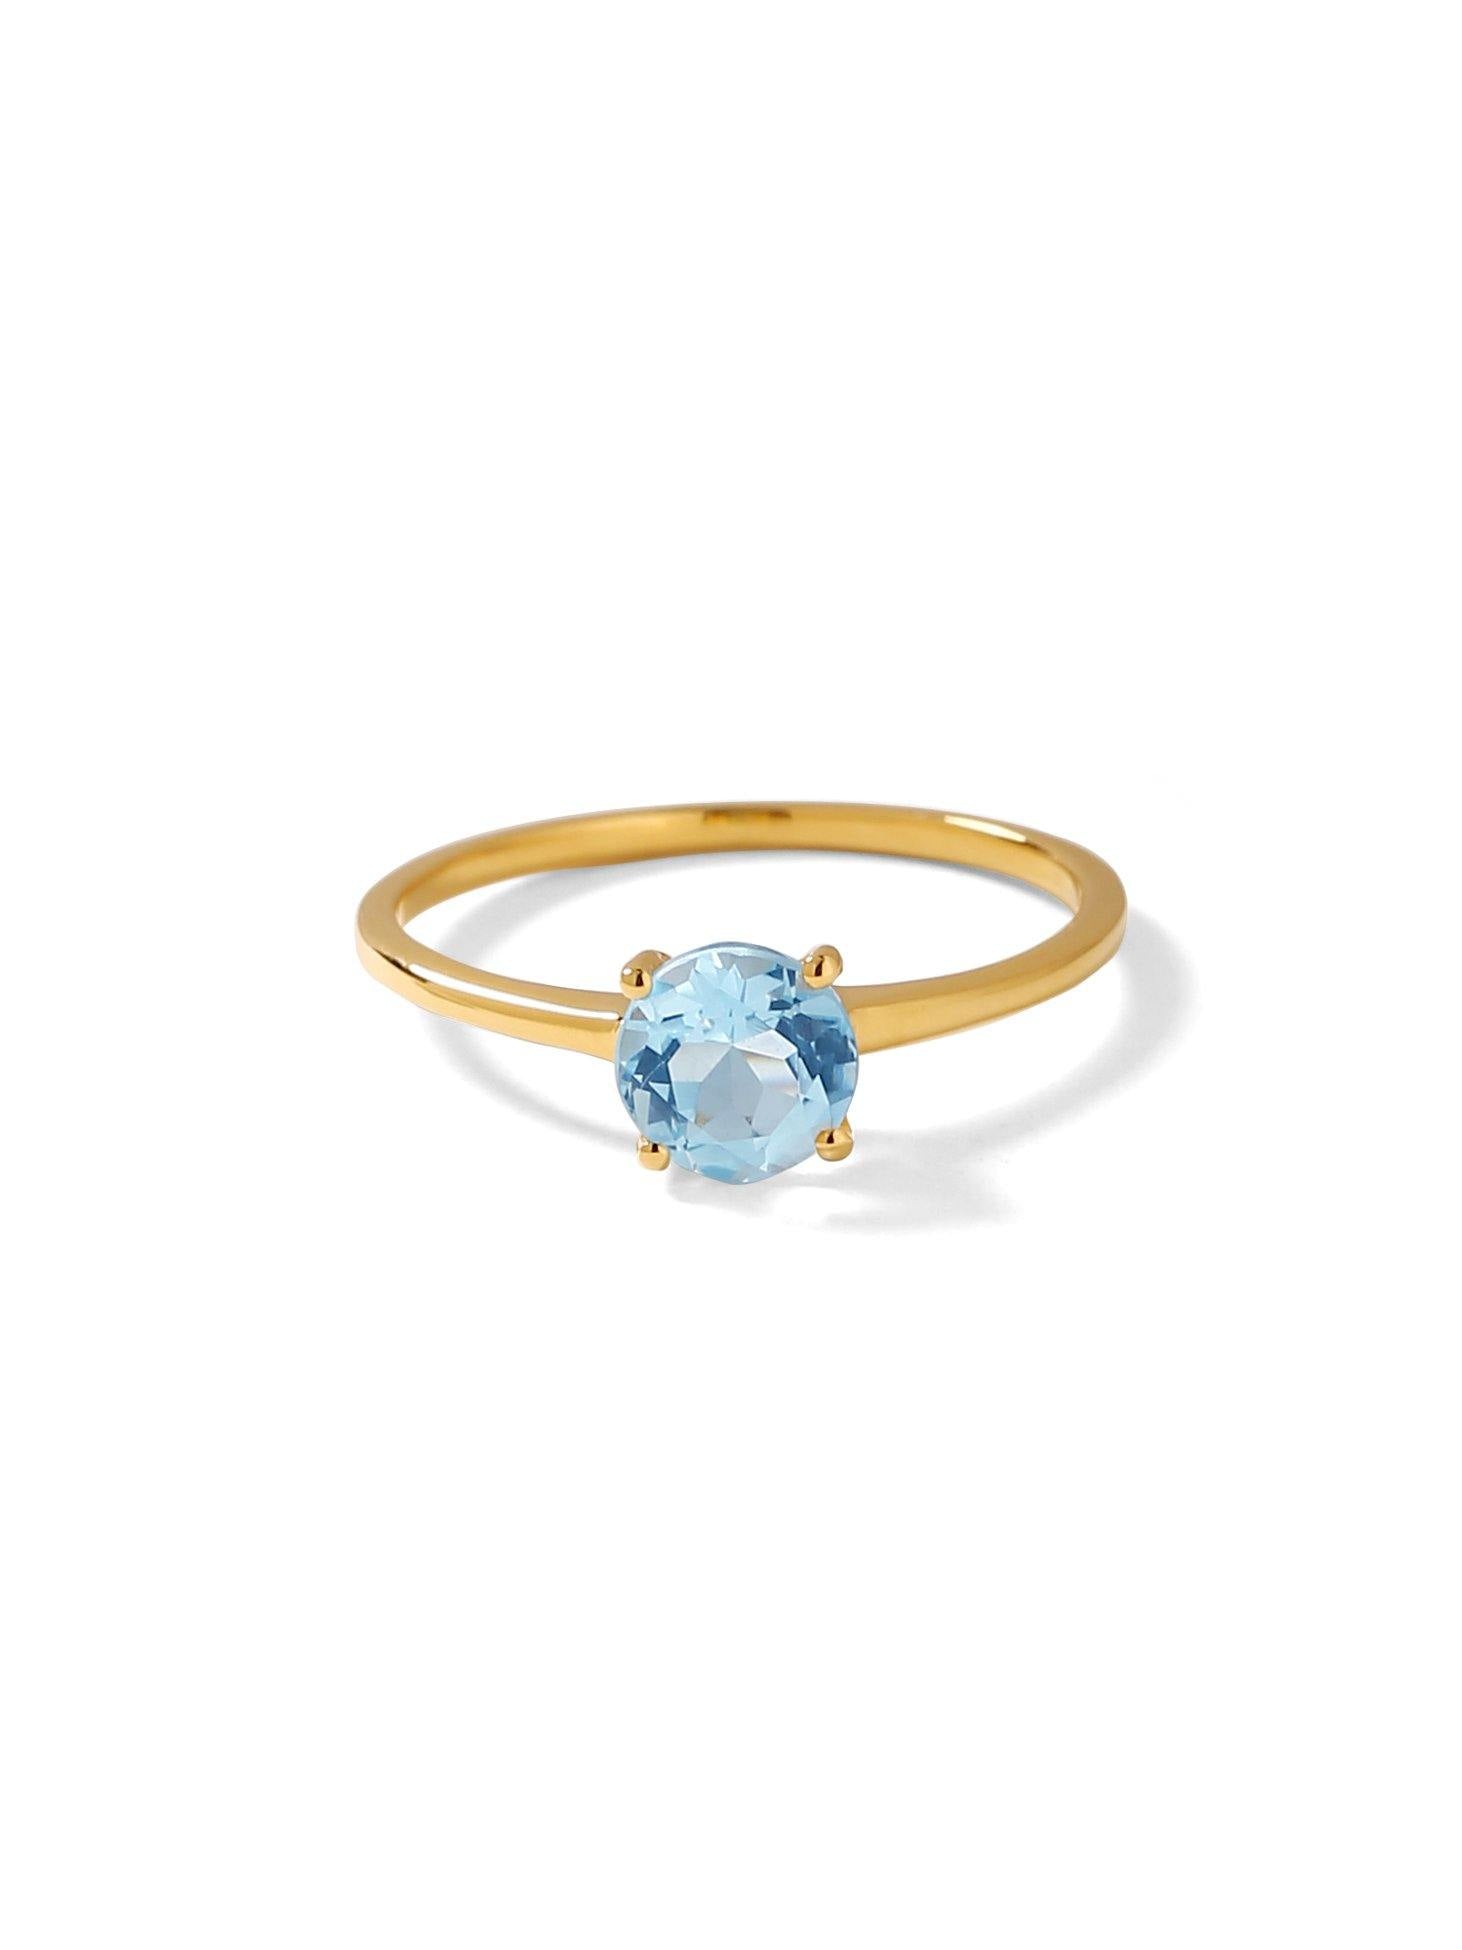 1.03 Ct Sky Blue Topaz Solid 10k Yellow Gold Solitaire Ring Jewelry - YoTreasure